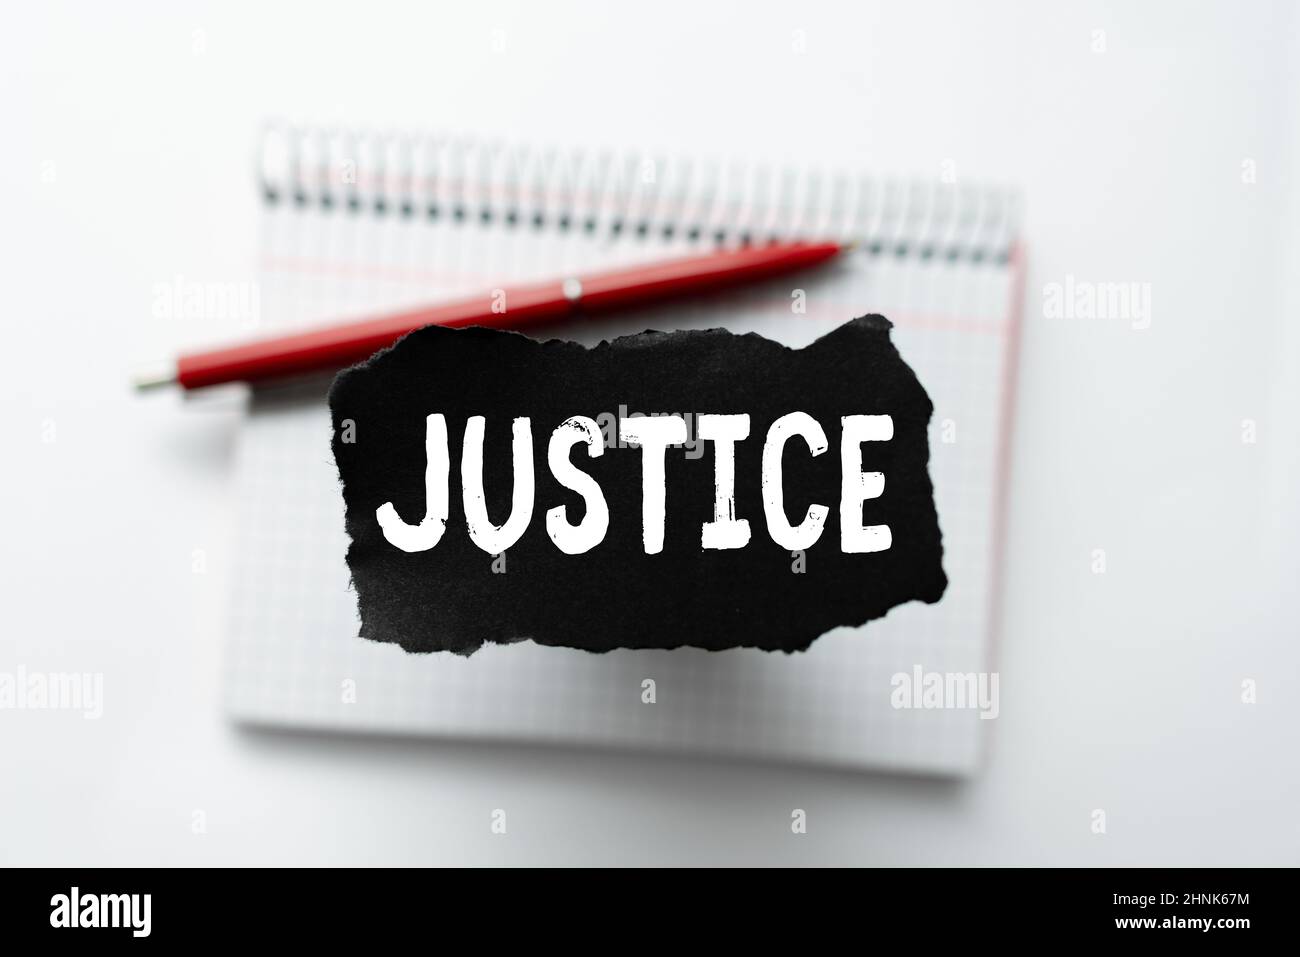 Sign displaying Justice, Word Written on impartial adjustment of conflicting claims or assignments Thinking New Writing Concepts, Breaking Through Wri Stock Photo